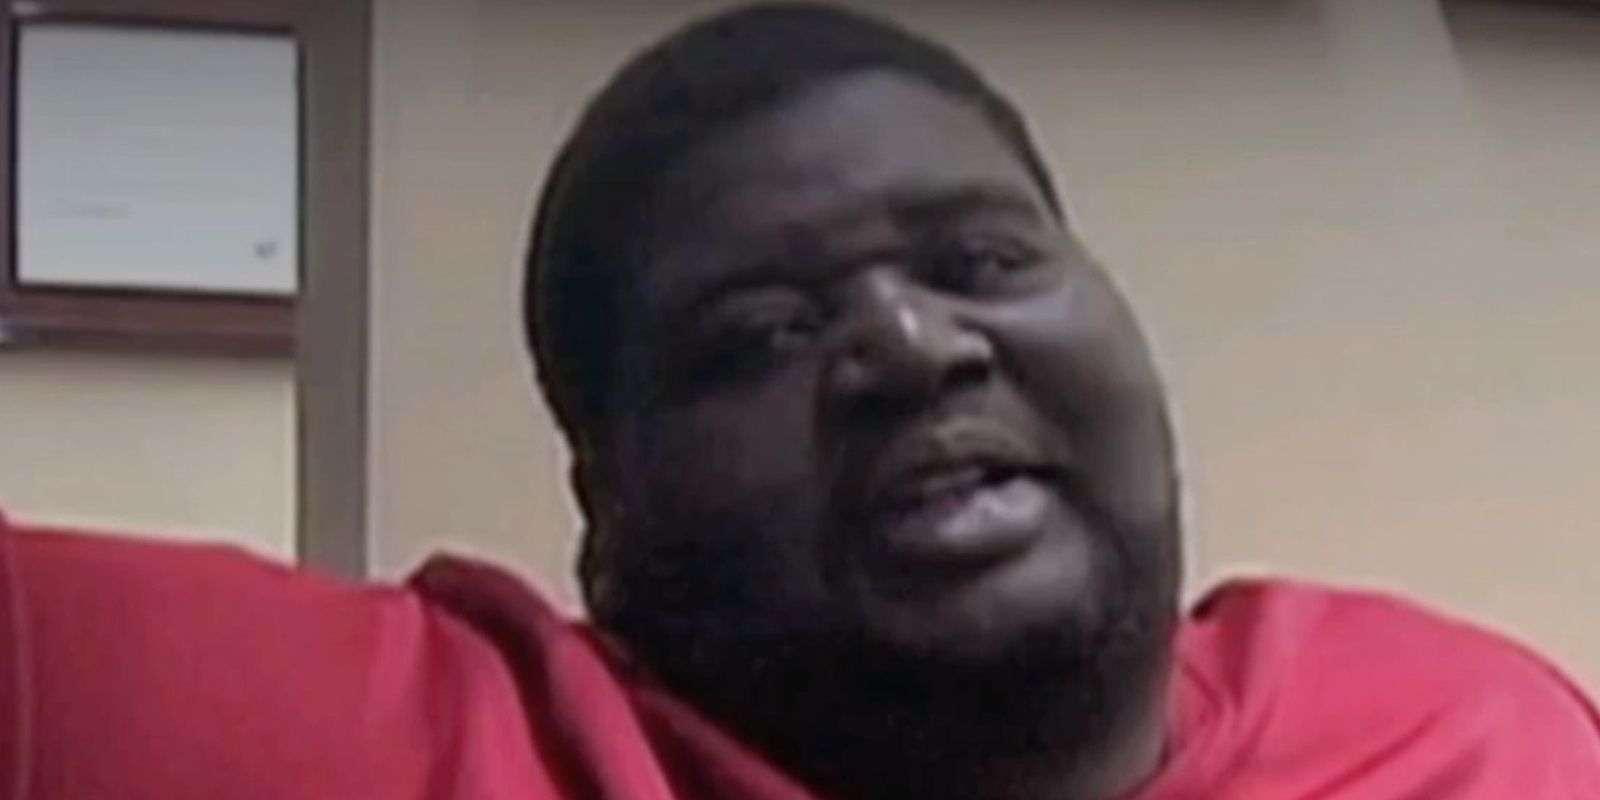 Henry Foots My 600-Lb Life close up in red shirt